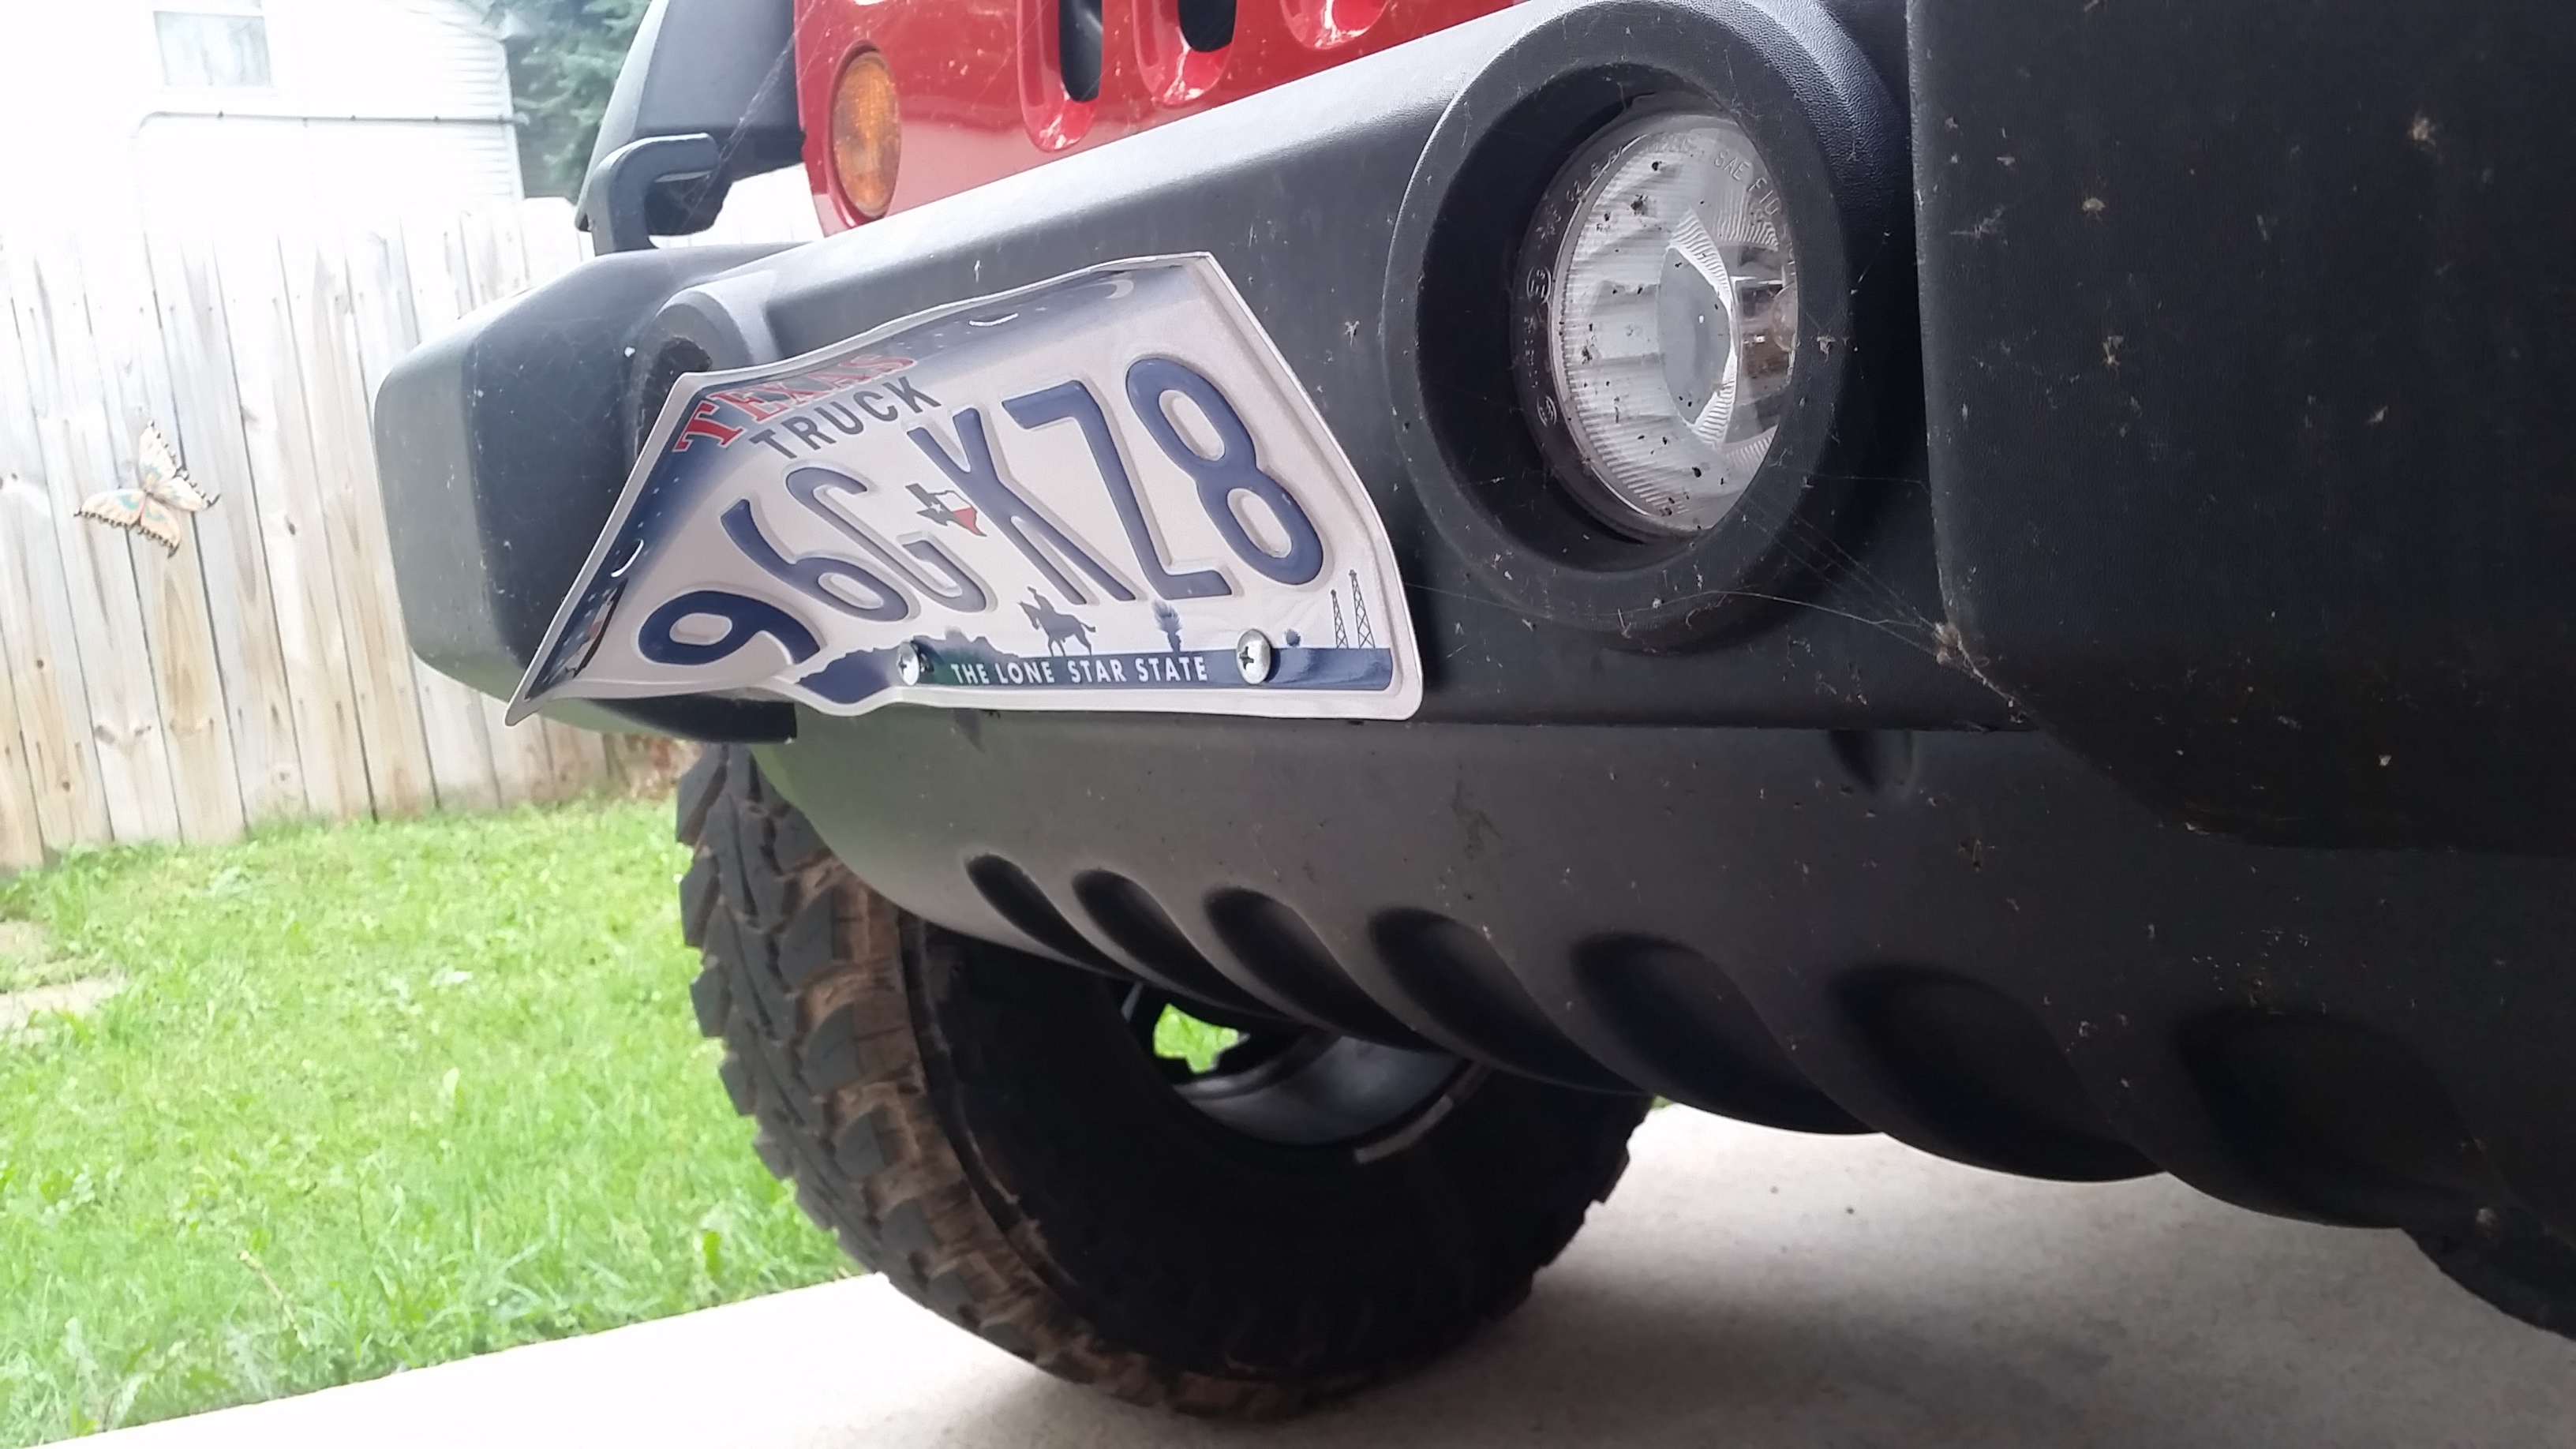 Stock Front License Plate Mounting Option  - The top  destination for Jeep JK and JL Wrangler news, rumors, and discussion